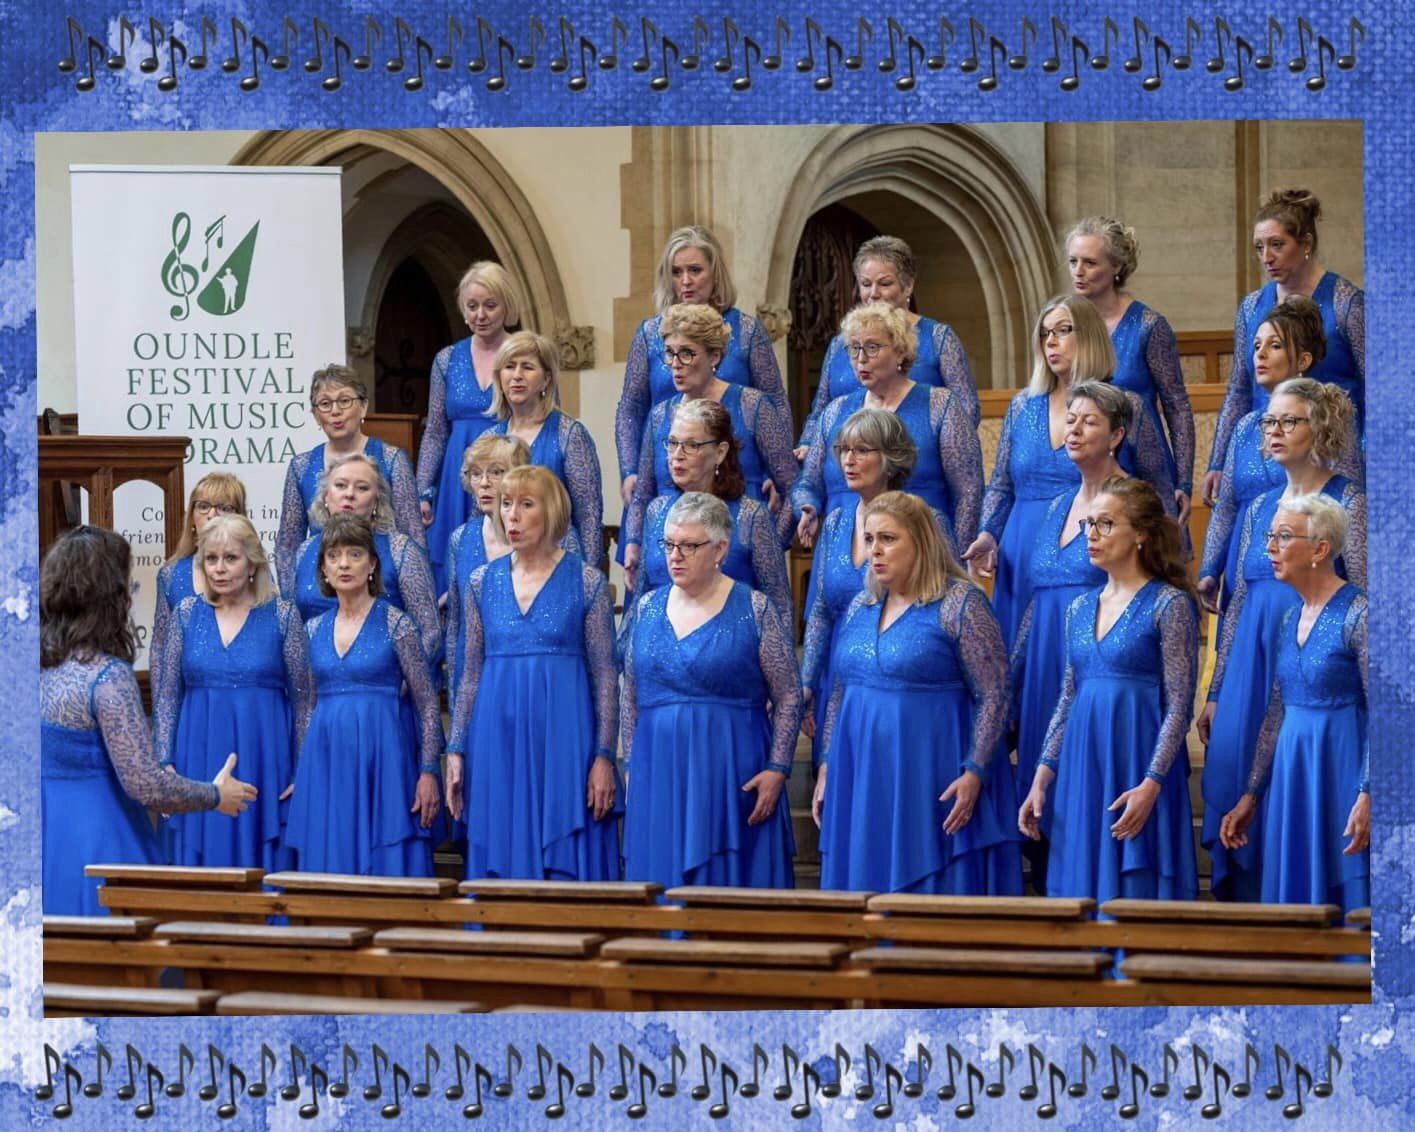 Oundle Festival of Music and Drama